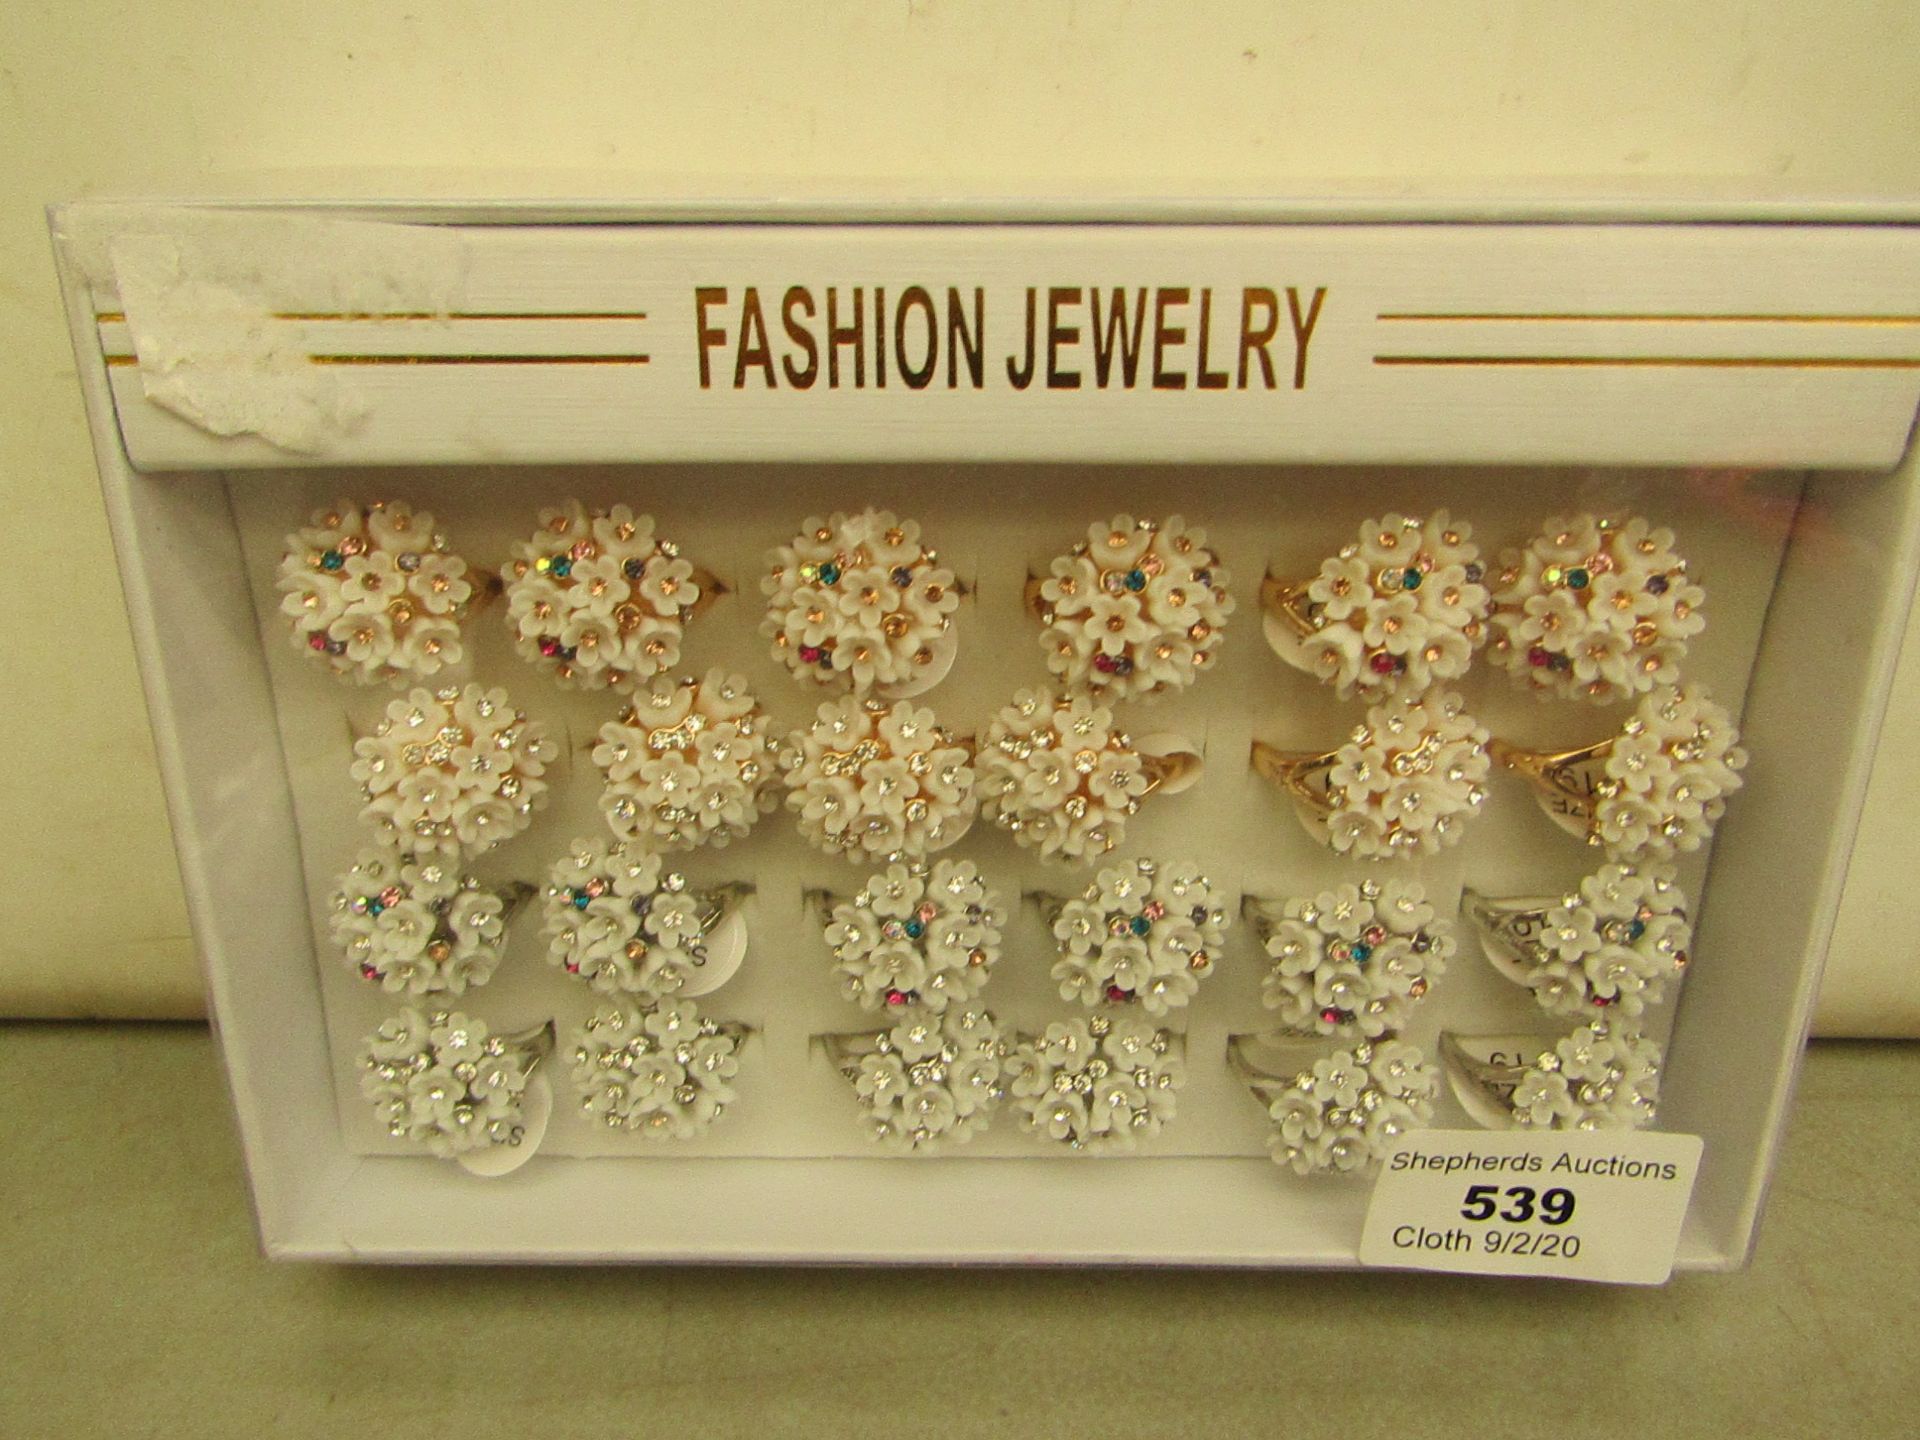 24 x various sized Decorative Rings (see image for designs) new & packaged